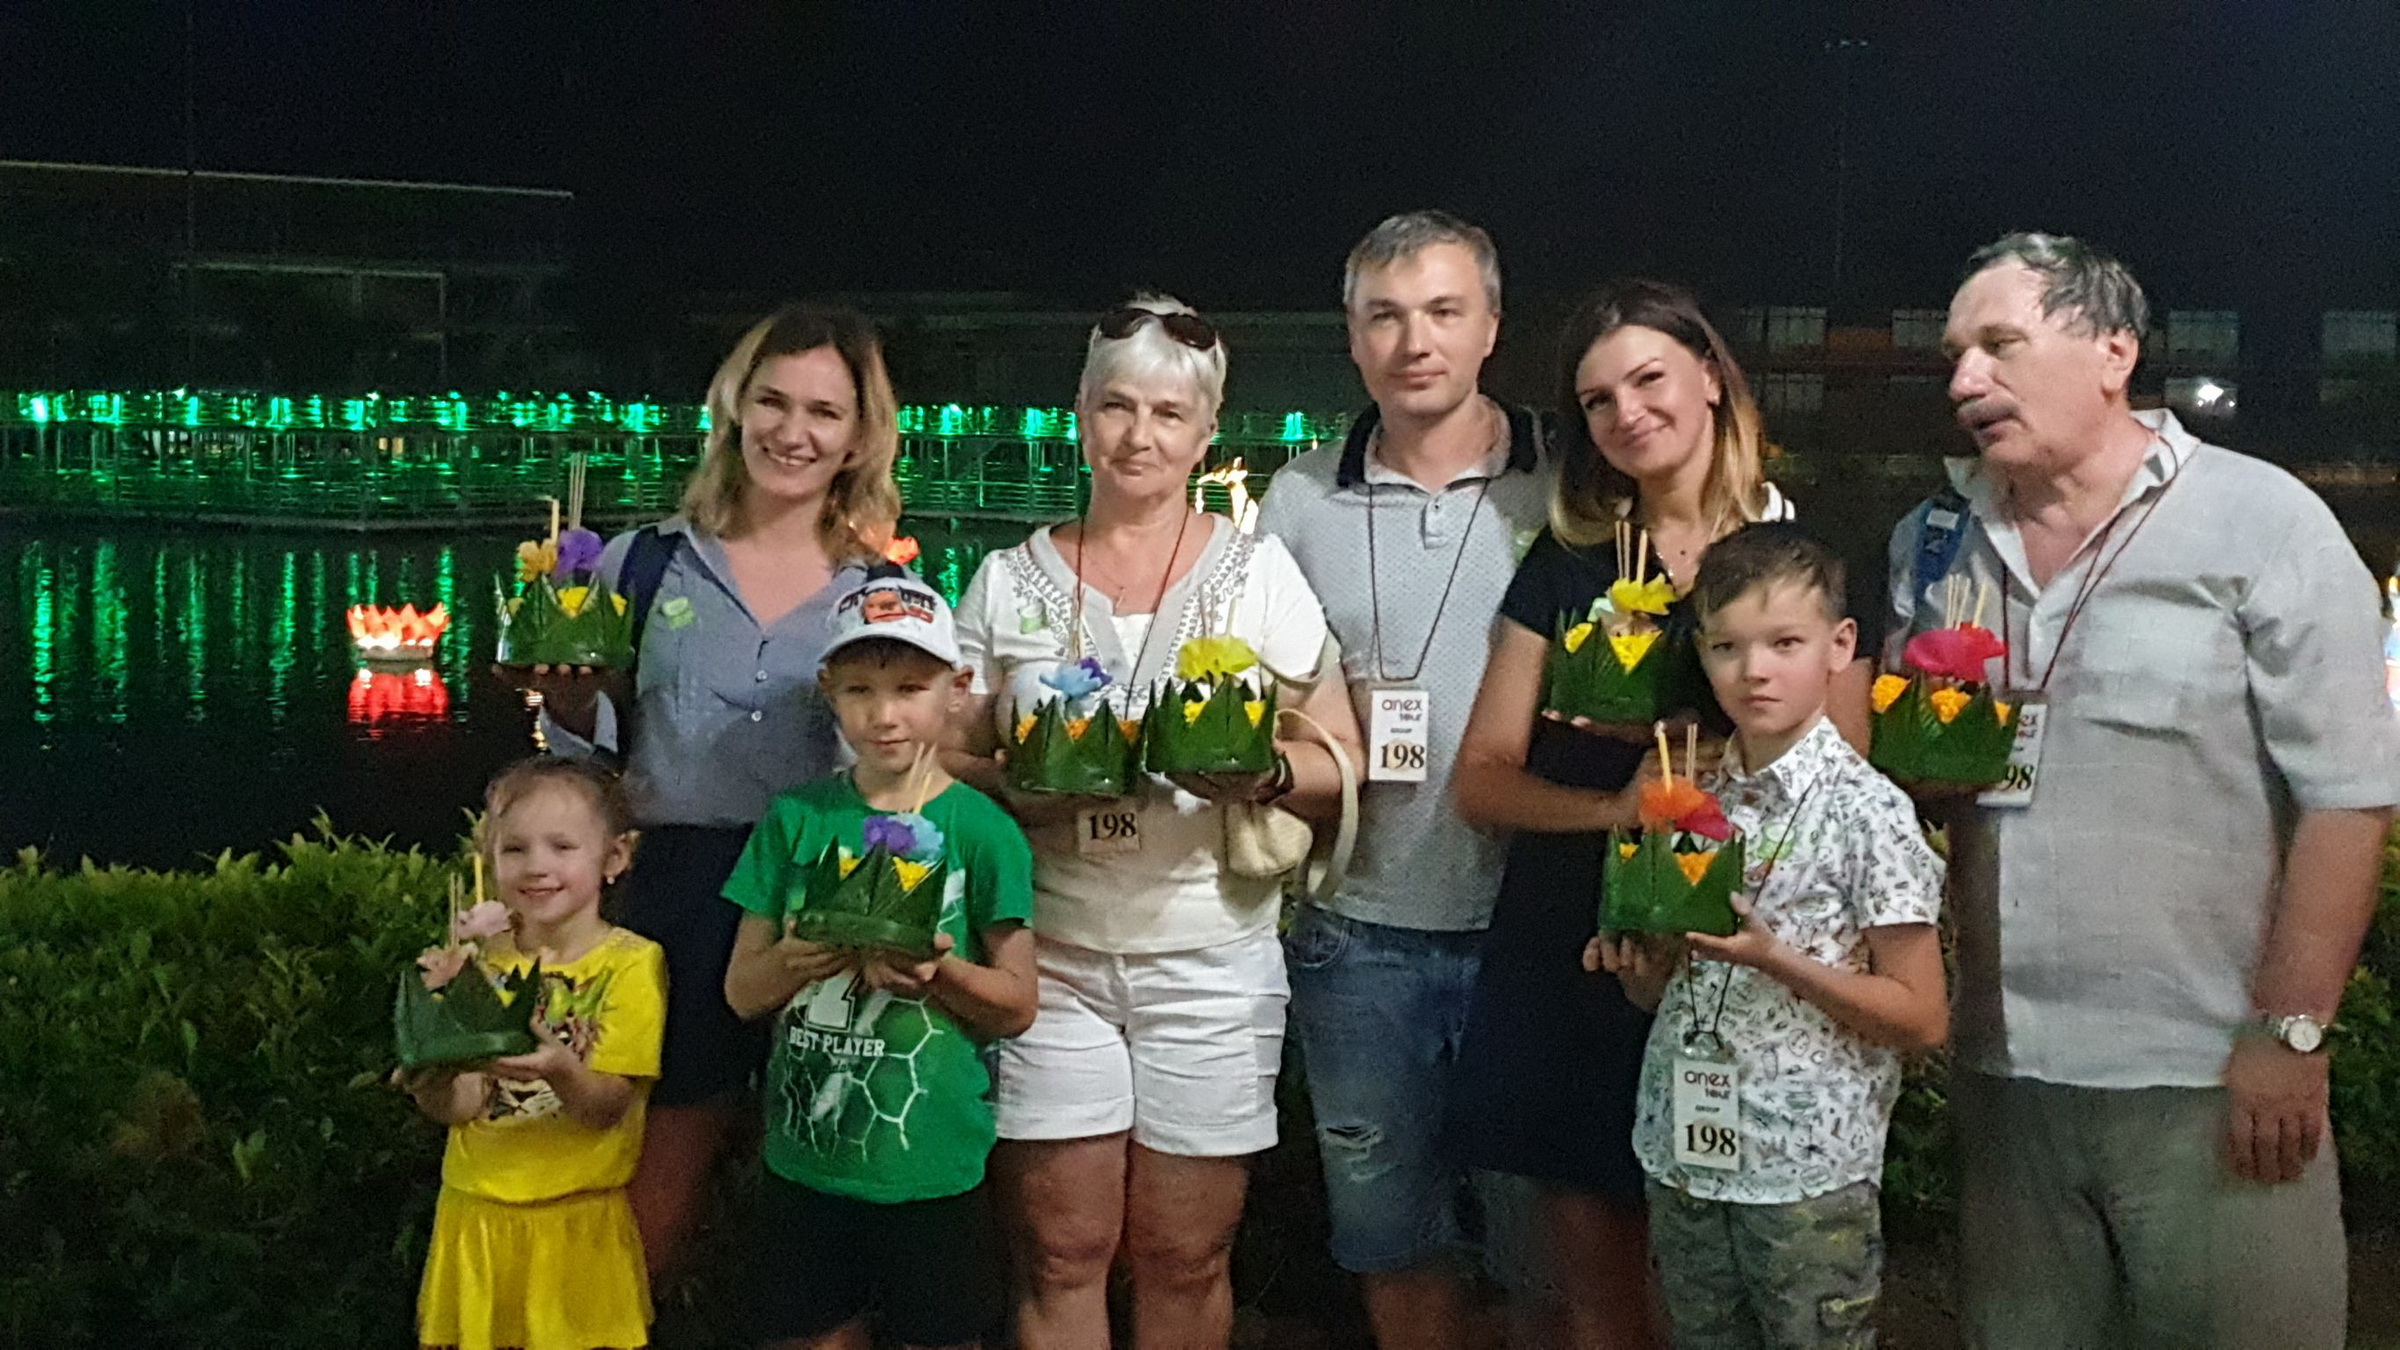 Tourists at a Loy Krathong event on Nov. 11, 2019 at Nong Nooch Tropical Garden in Pattaya.